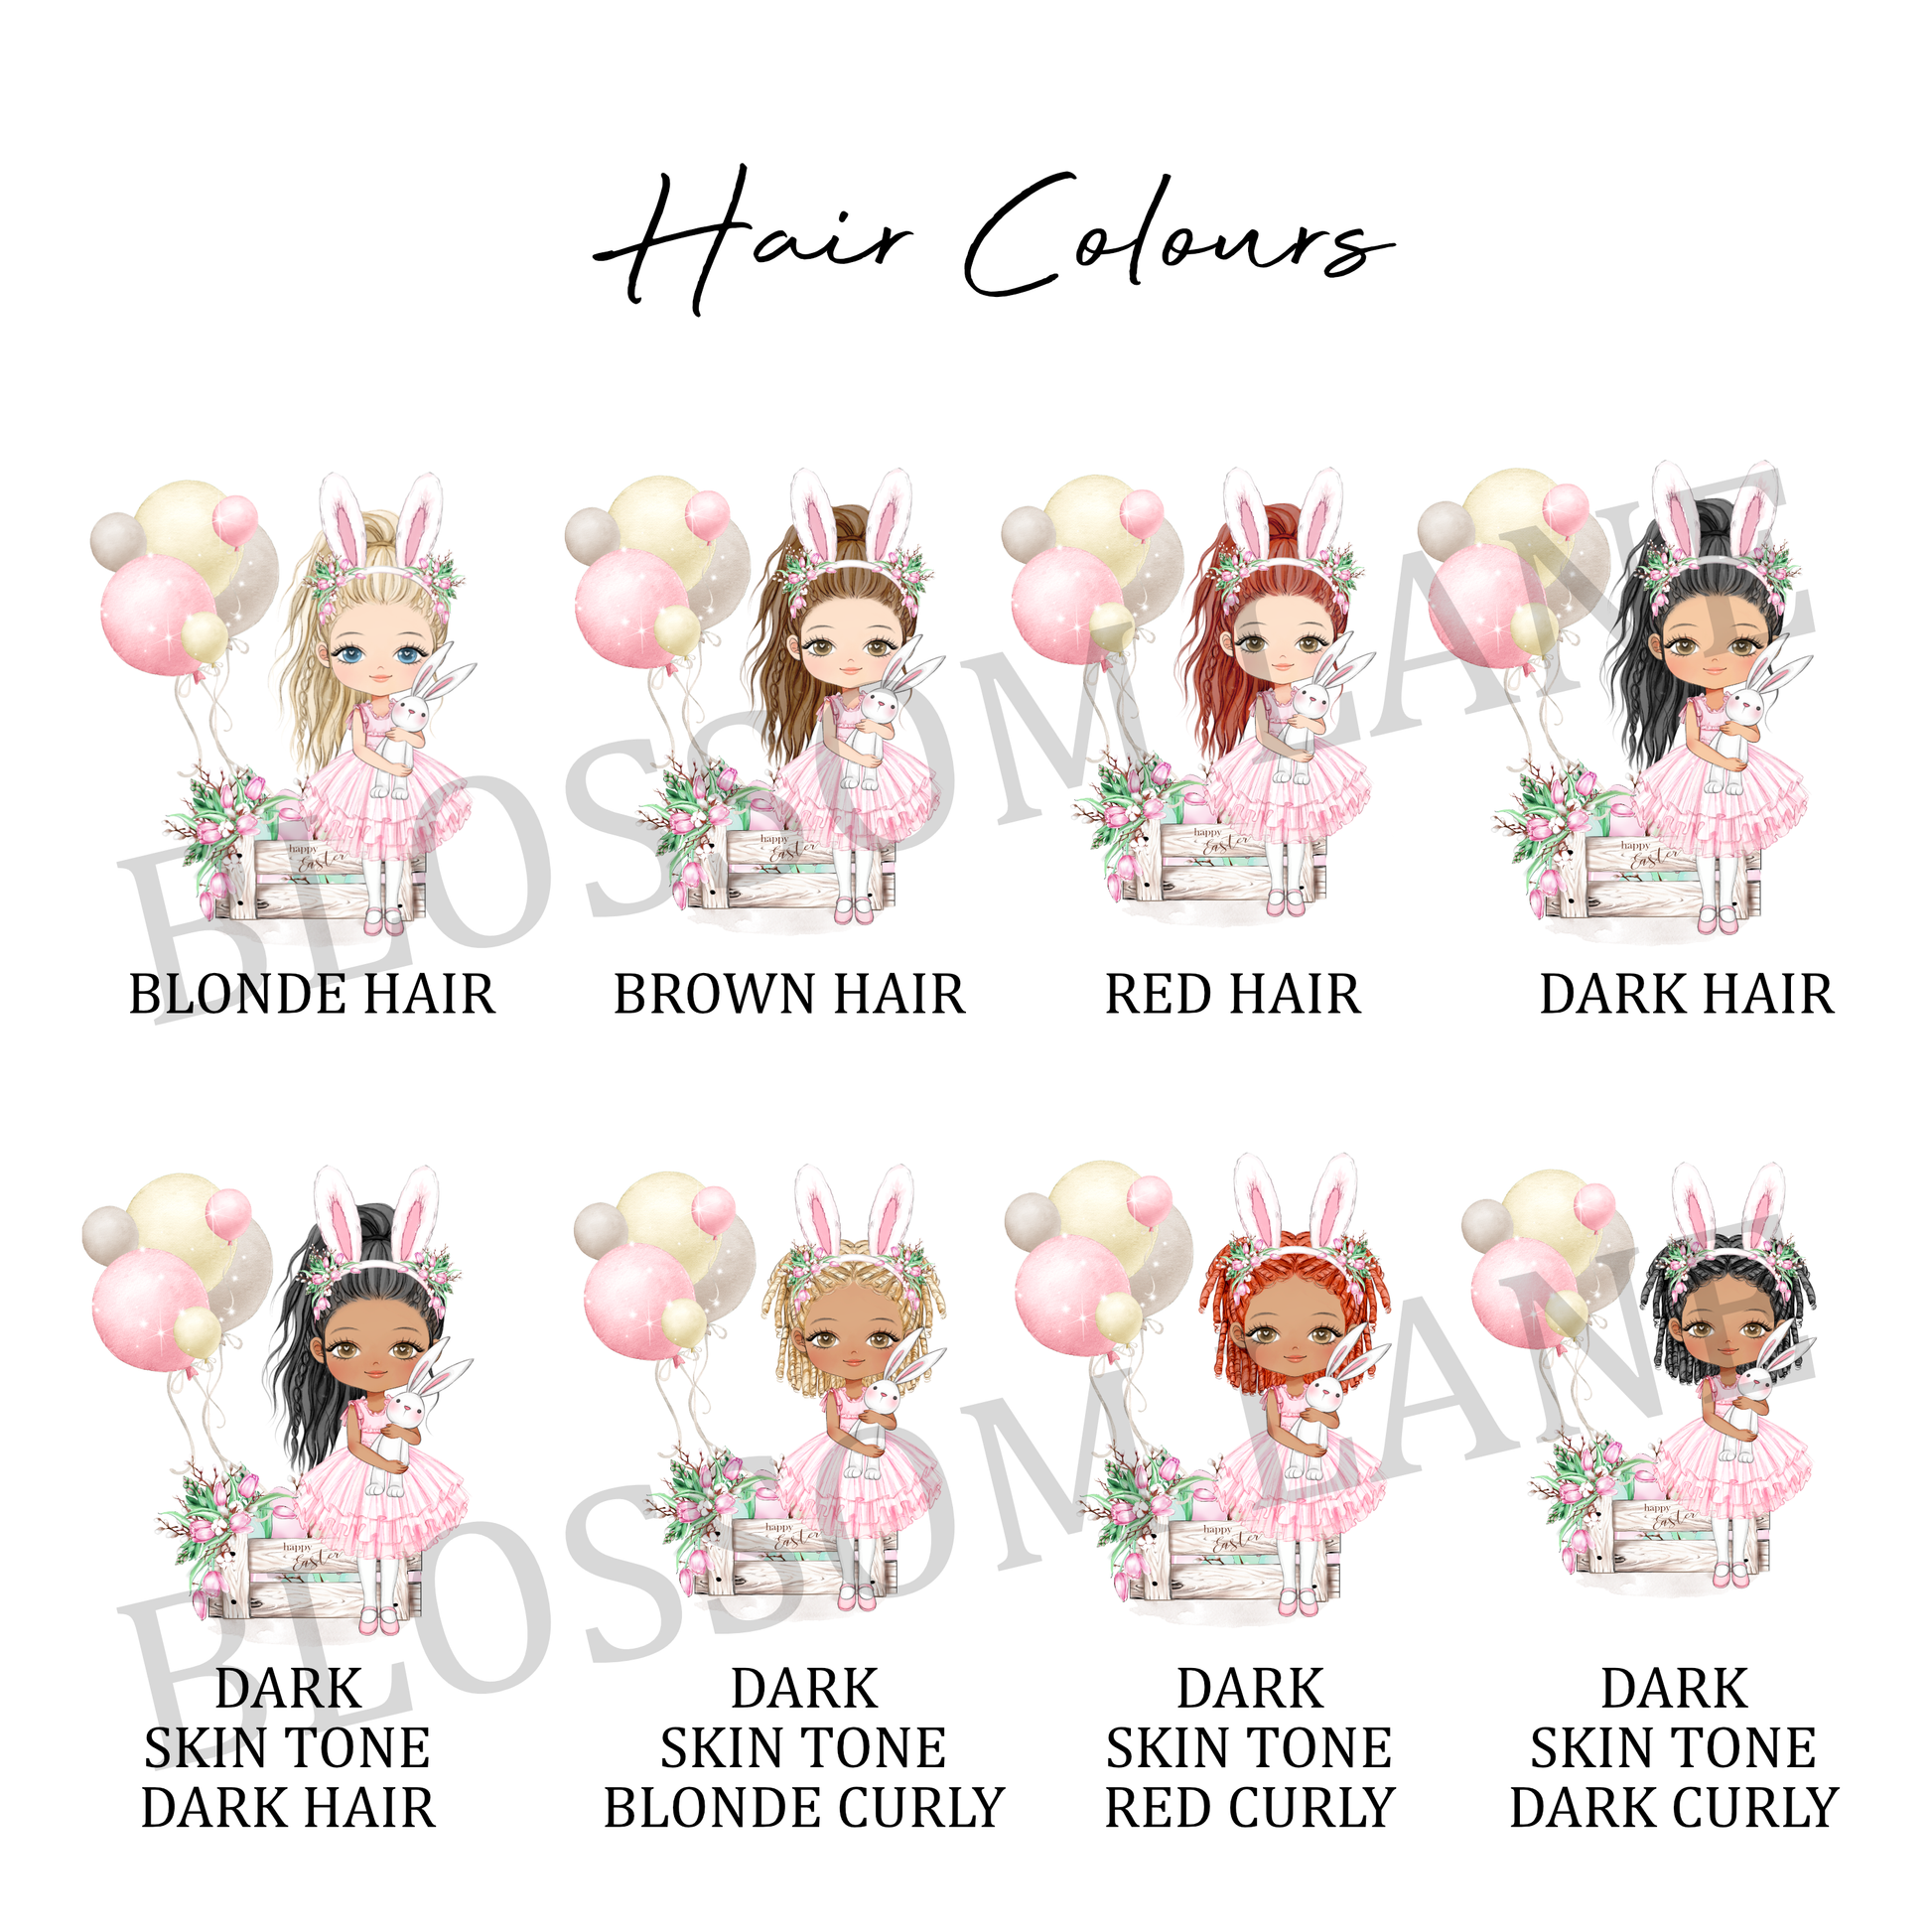 a set of hair colors for different types of hair